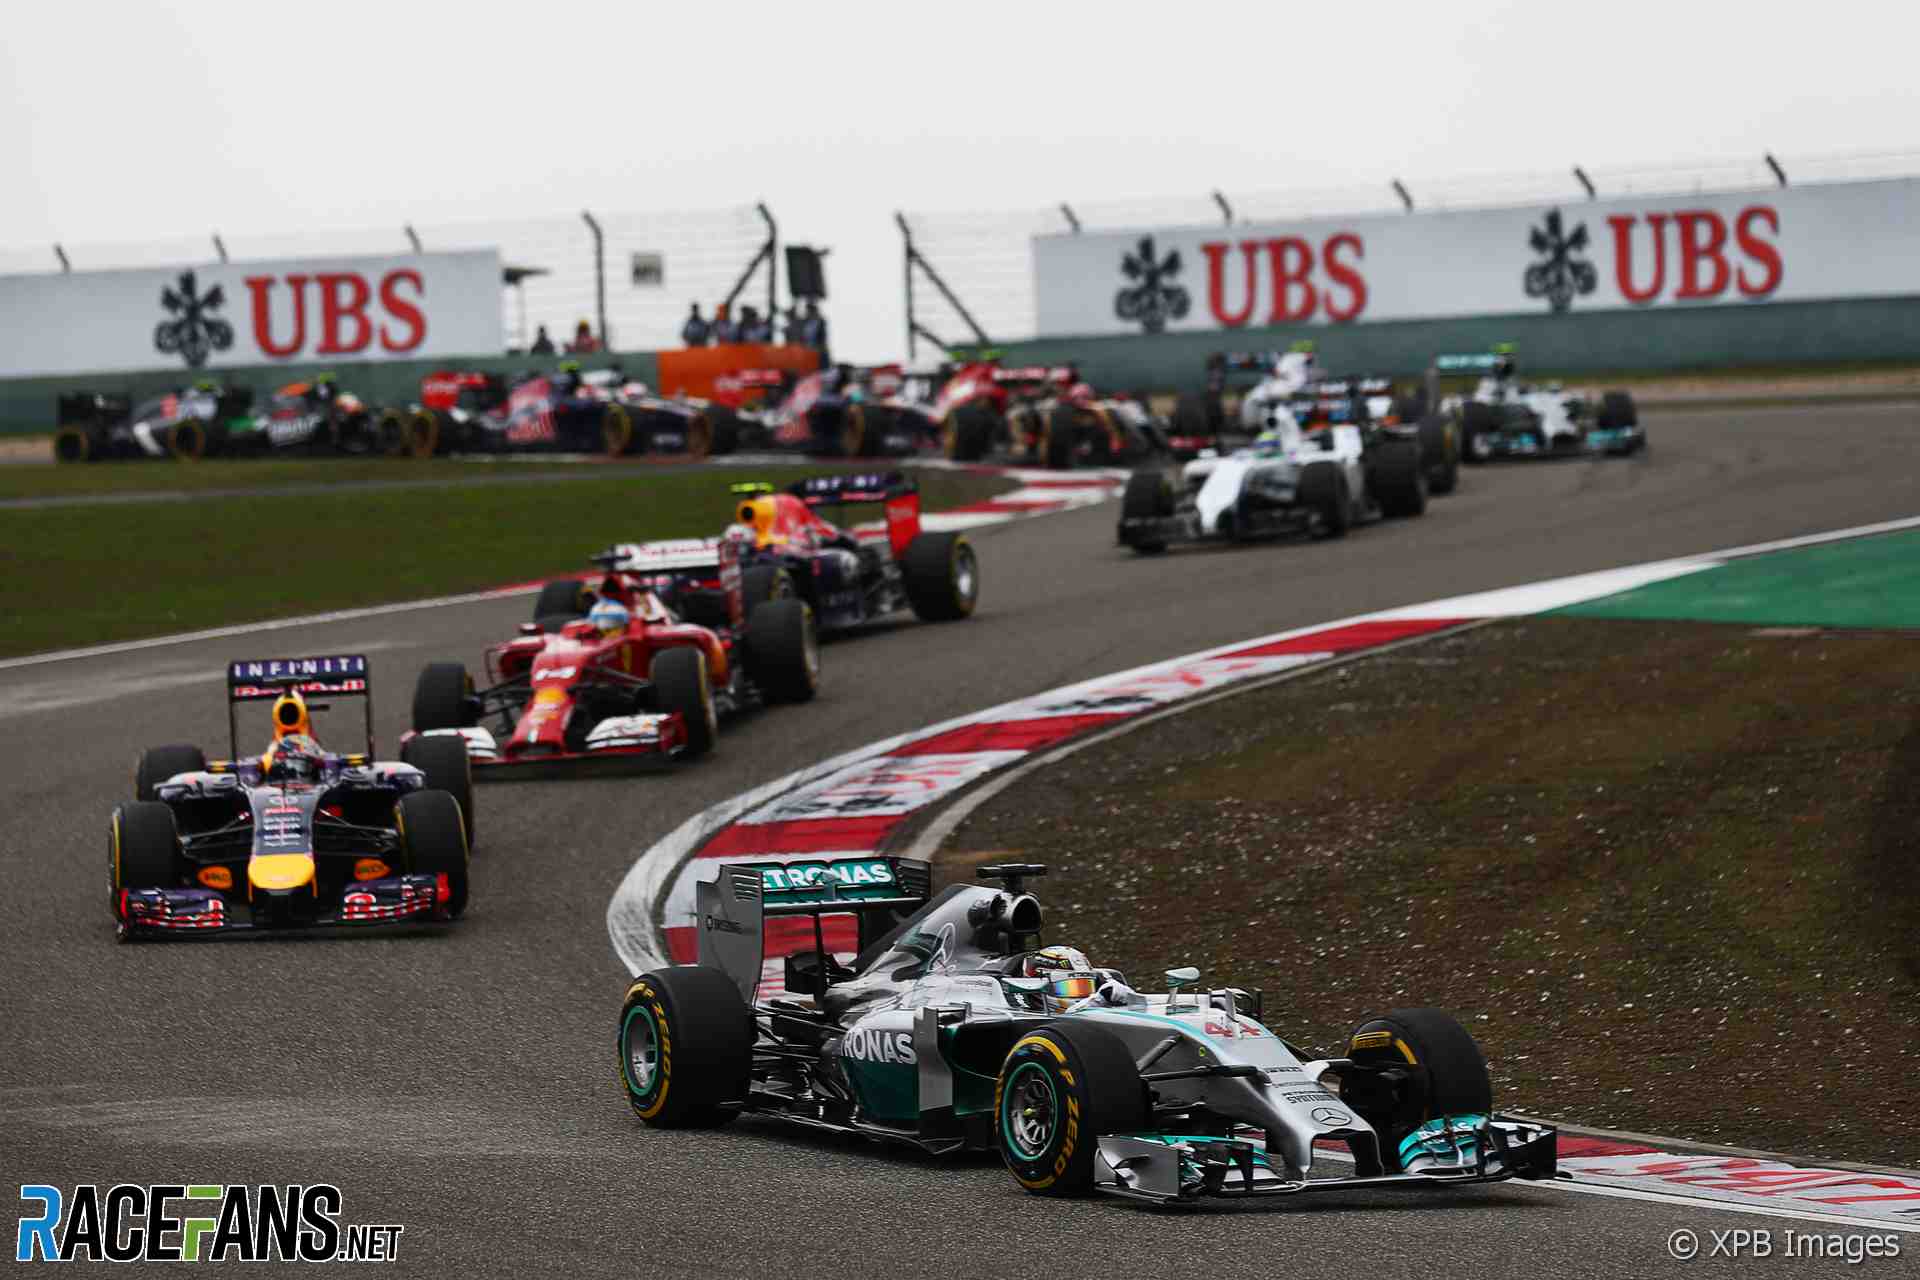 Lewis Hamilton leads at the start of the 2014 Chinese Grand Prix